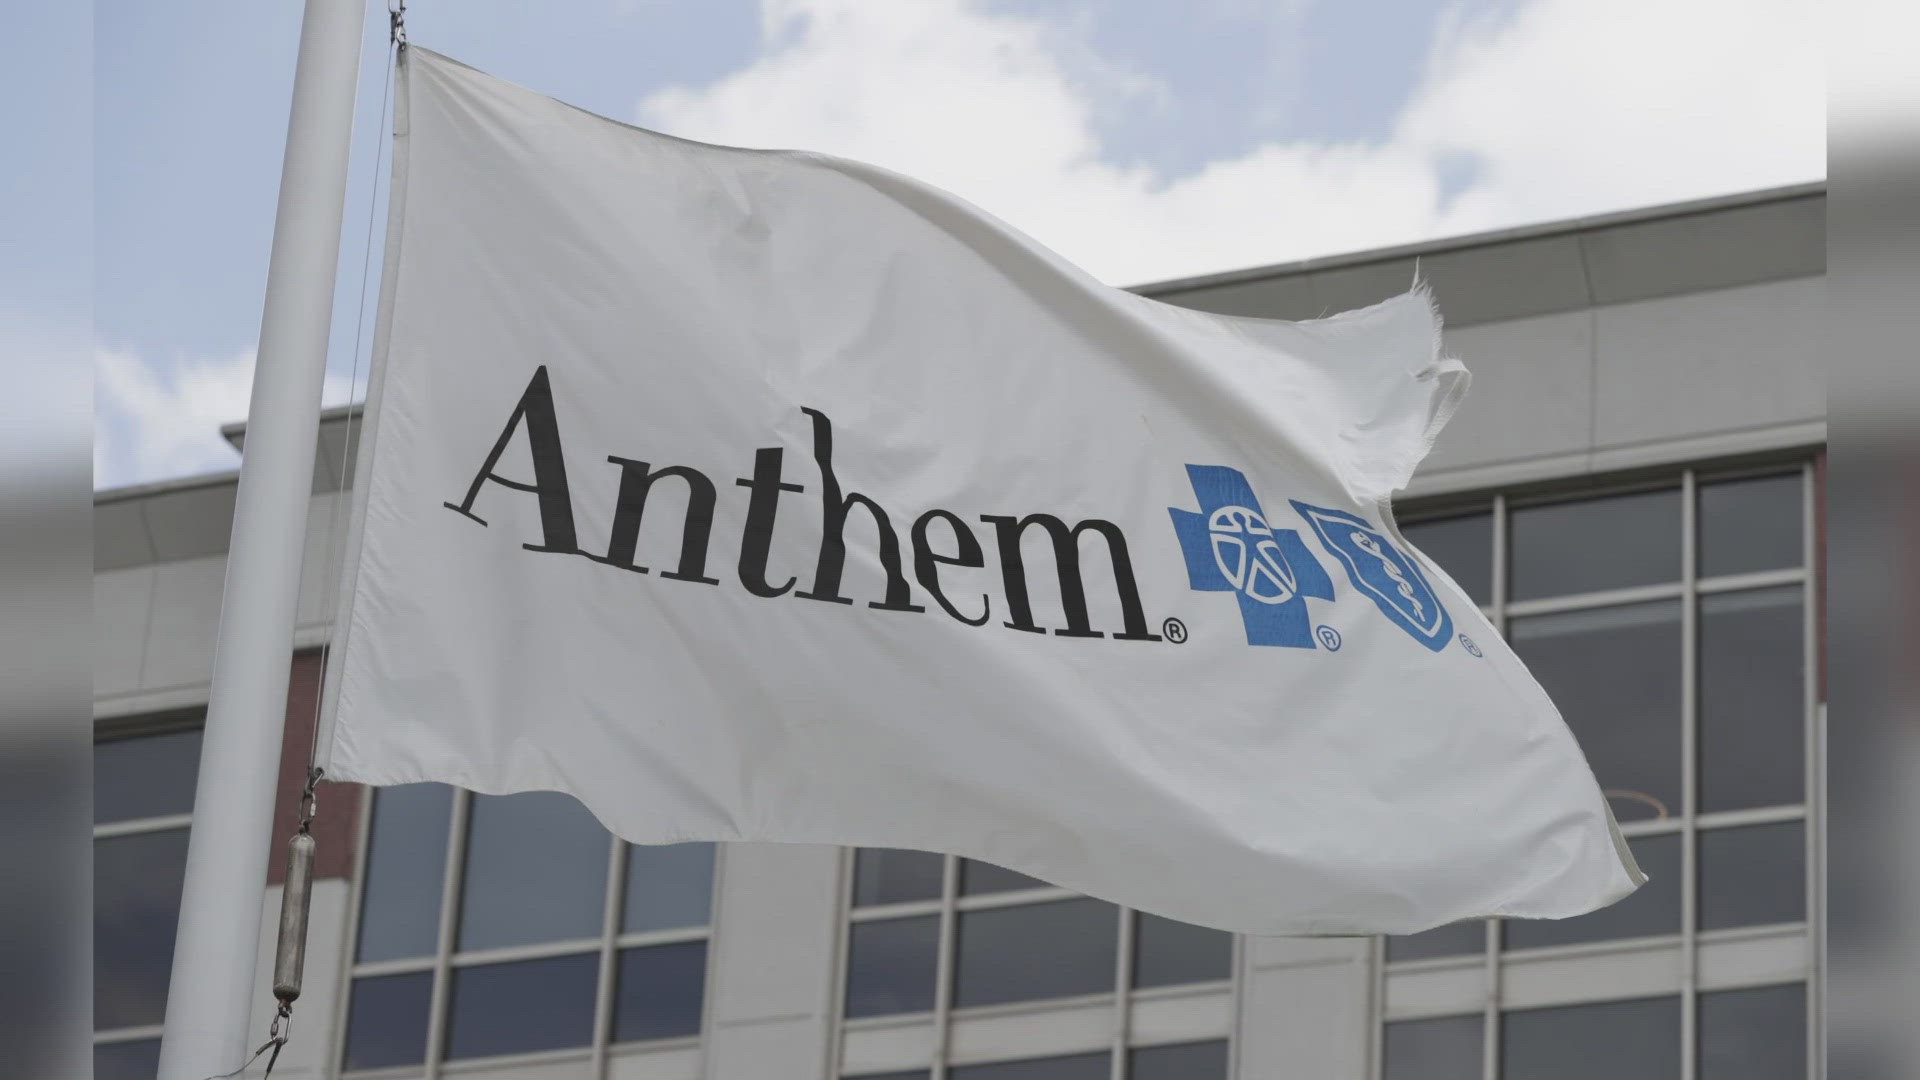 The contract between CommonSpirit, formerly Centura health, and Anthem Blue Cross Blue Shield expired as of midnight Wednesday.